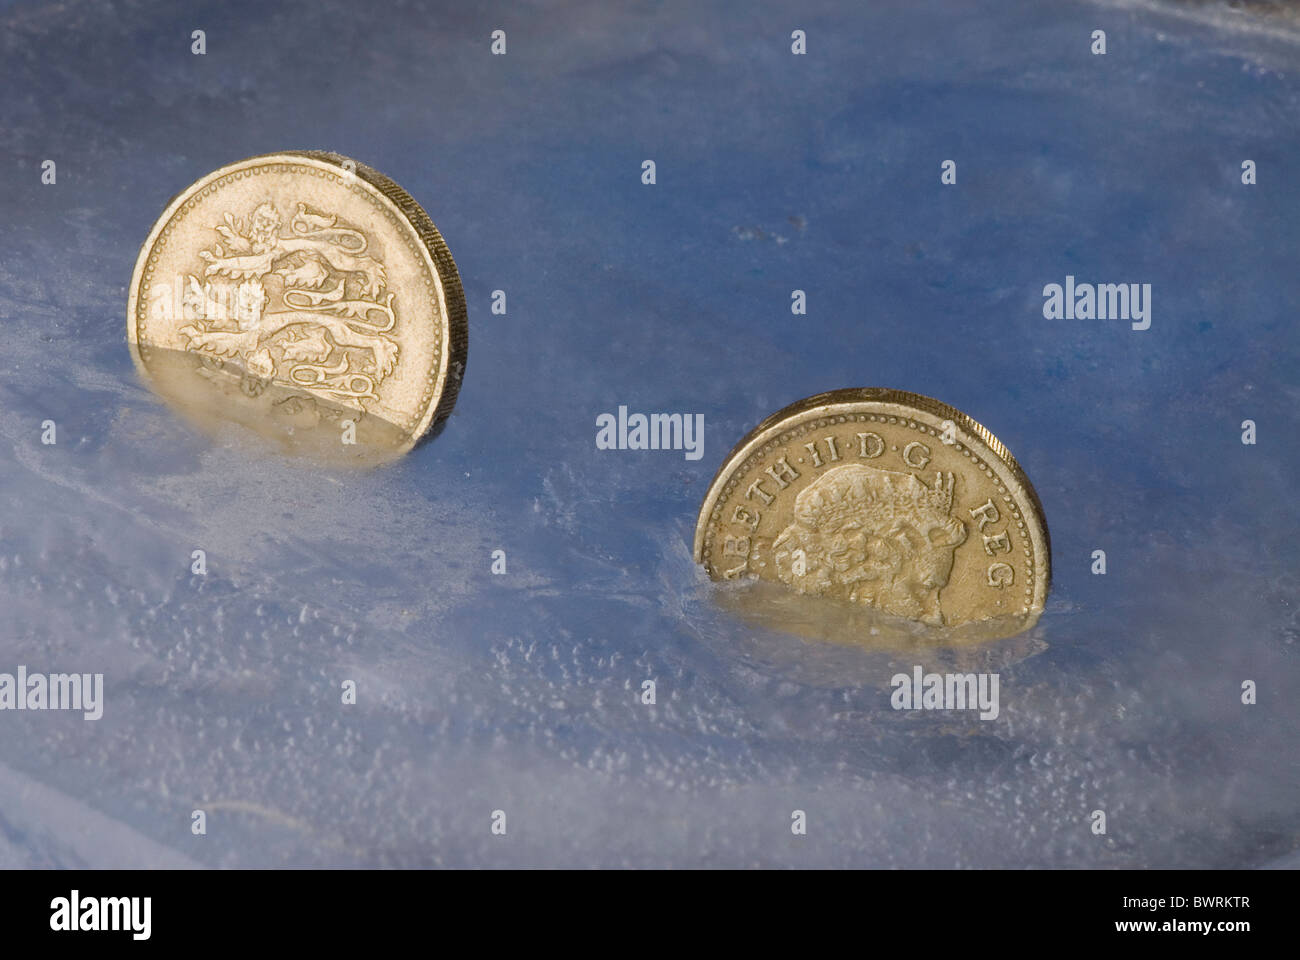 Frozen pound - coins suspended in ice economy Stock Photo